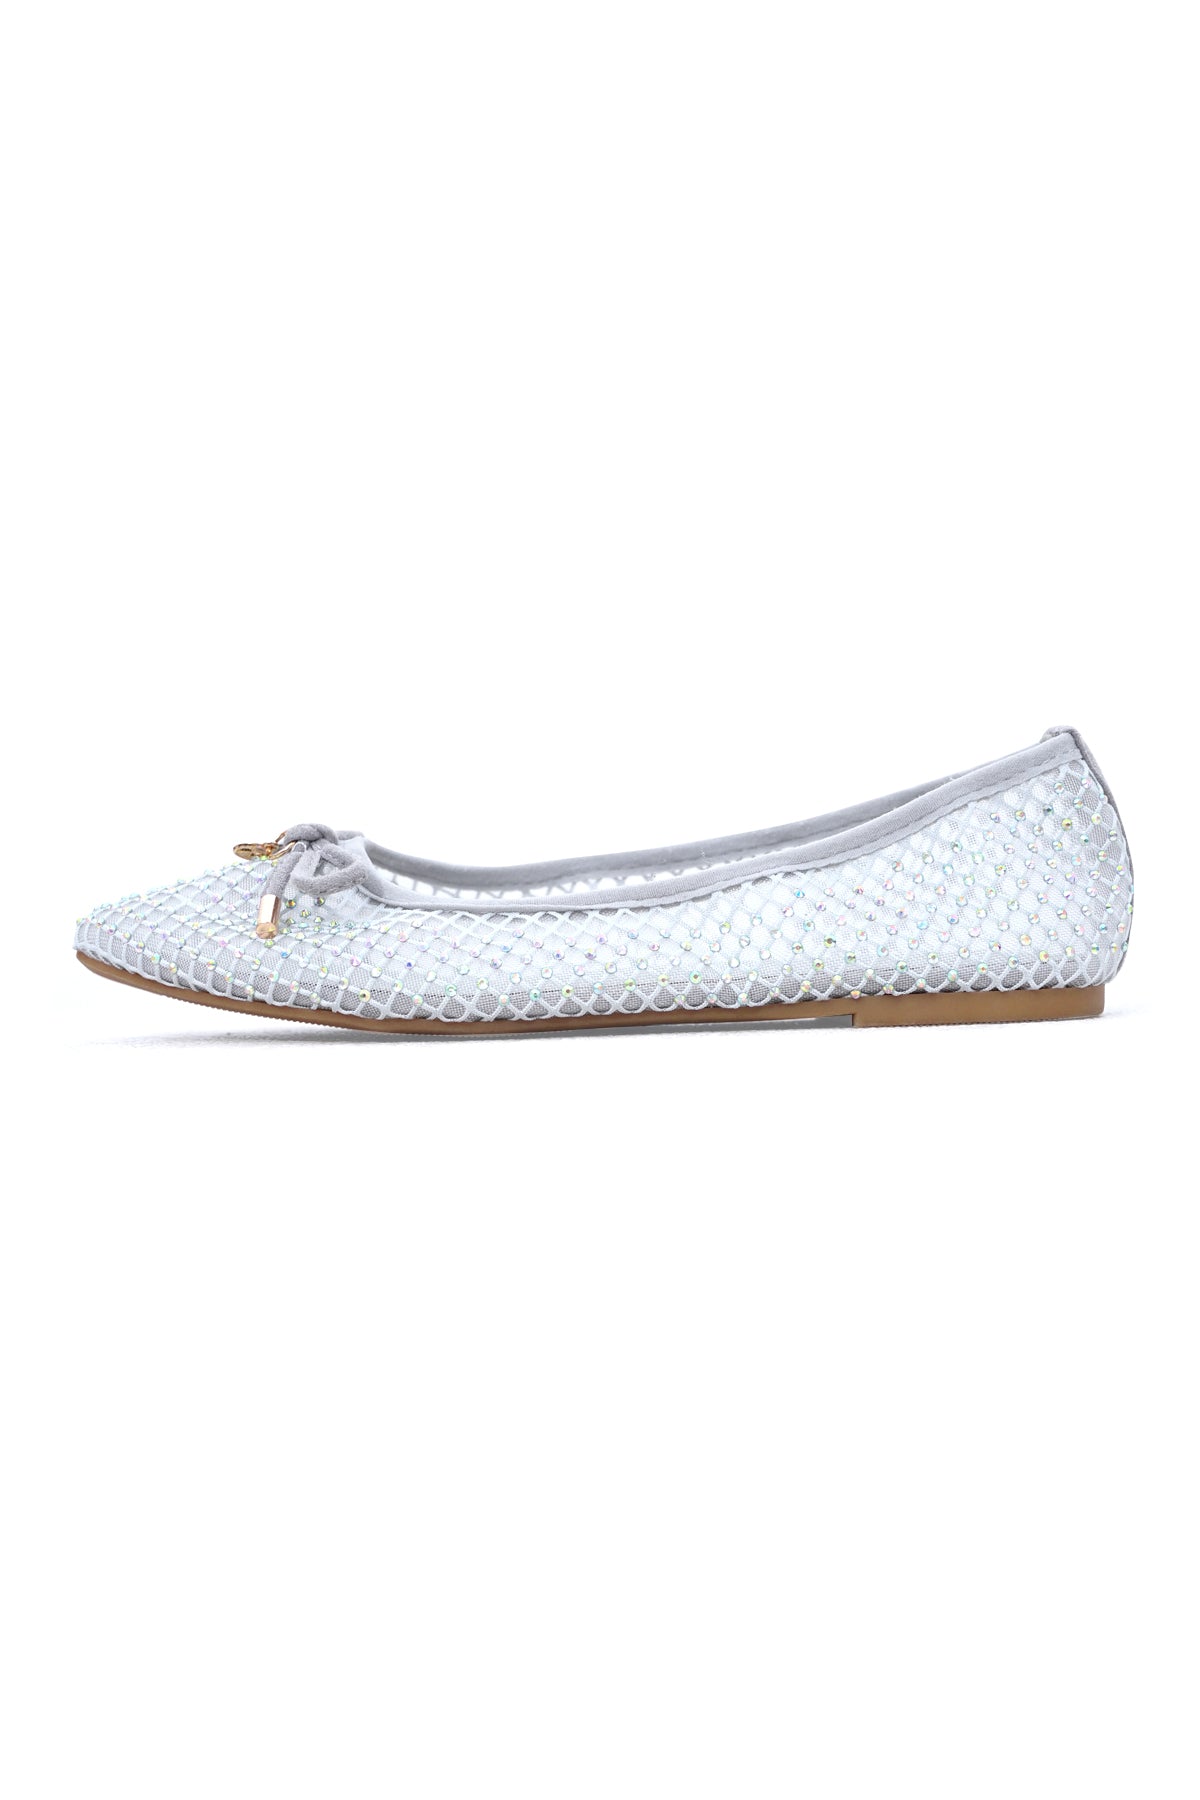 Fiona Flat Shoes - Silver